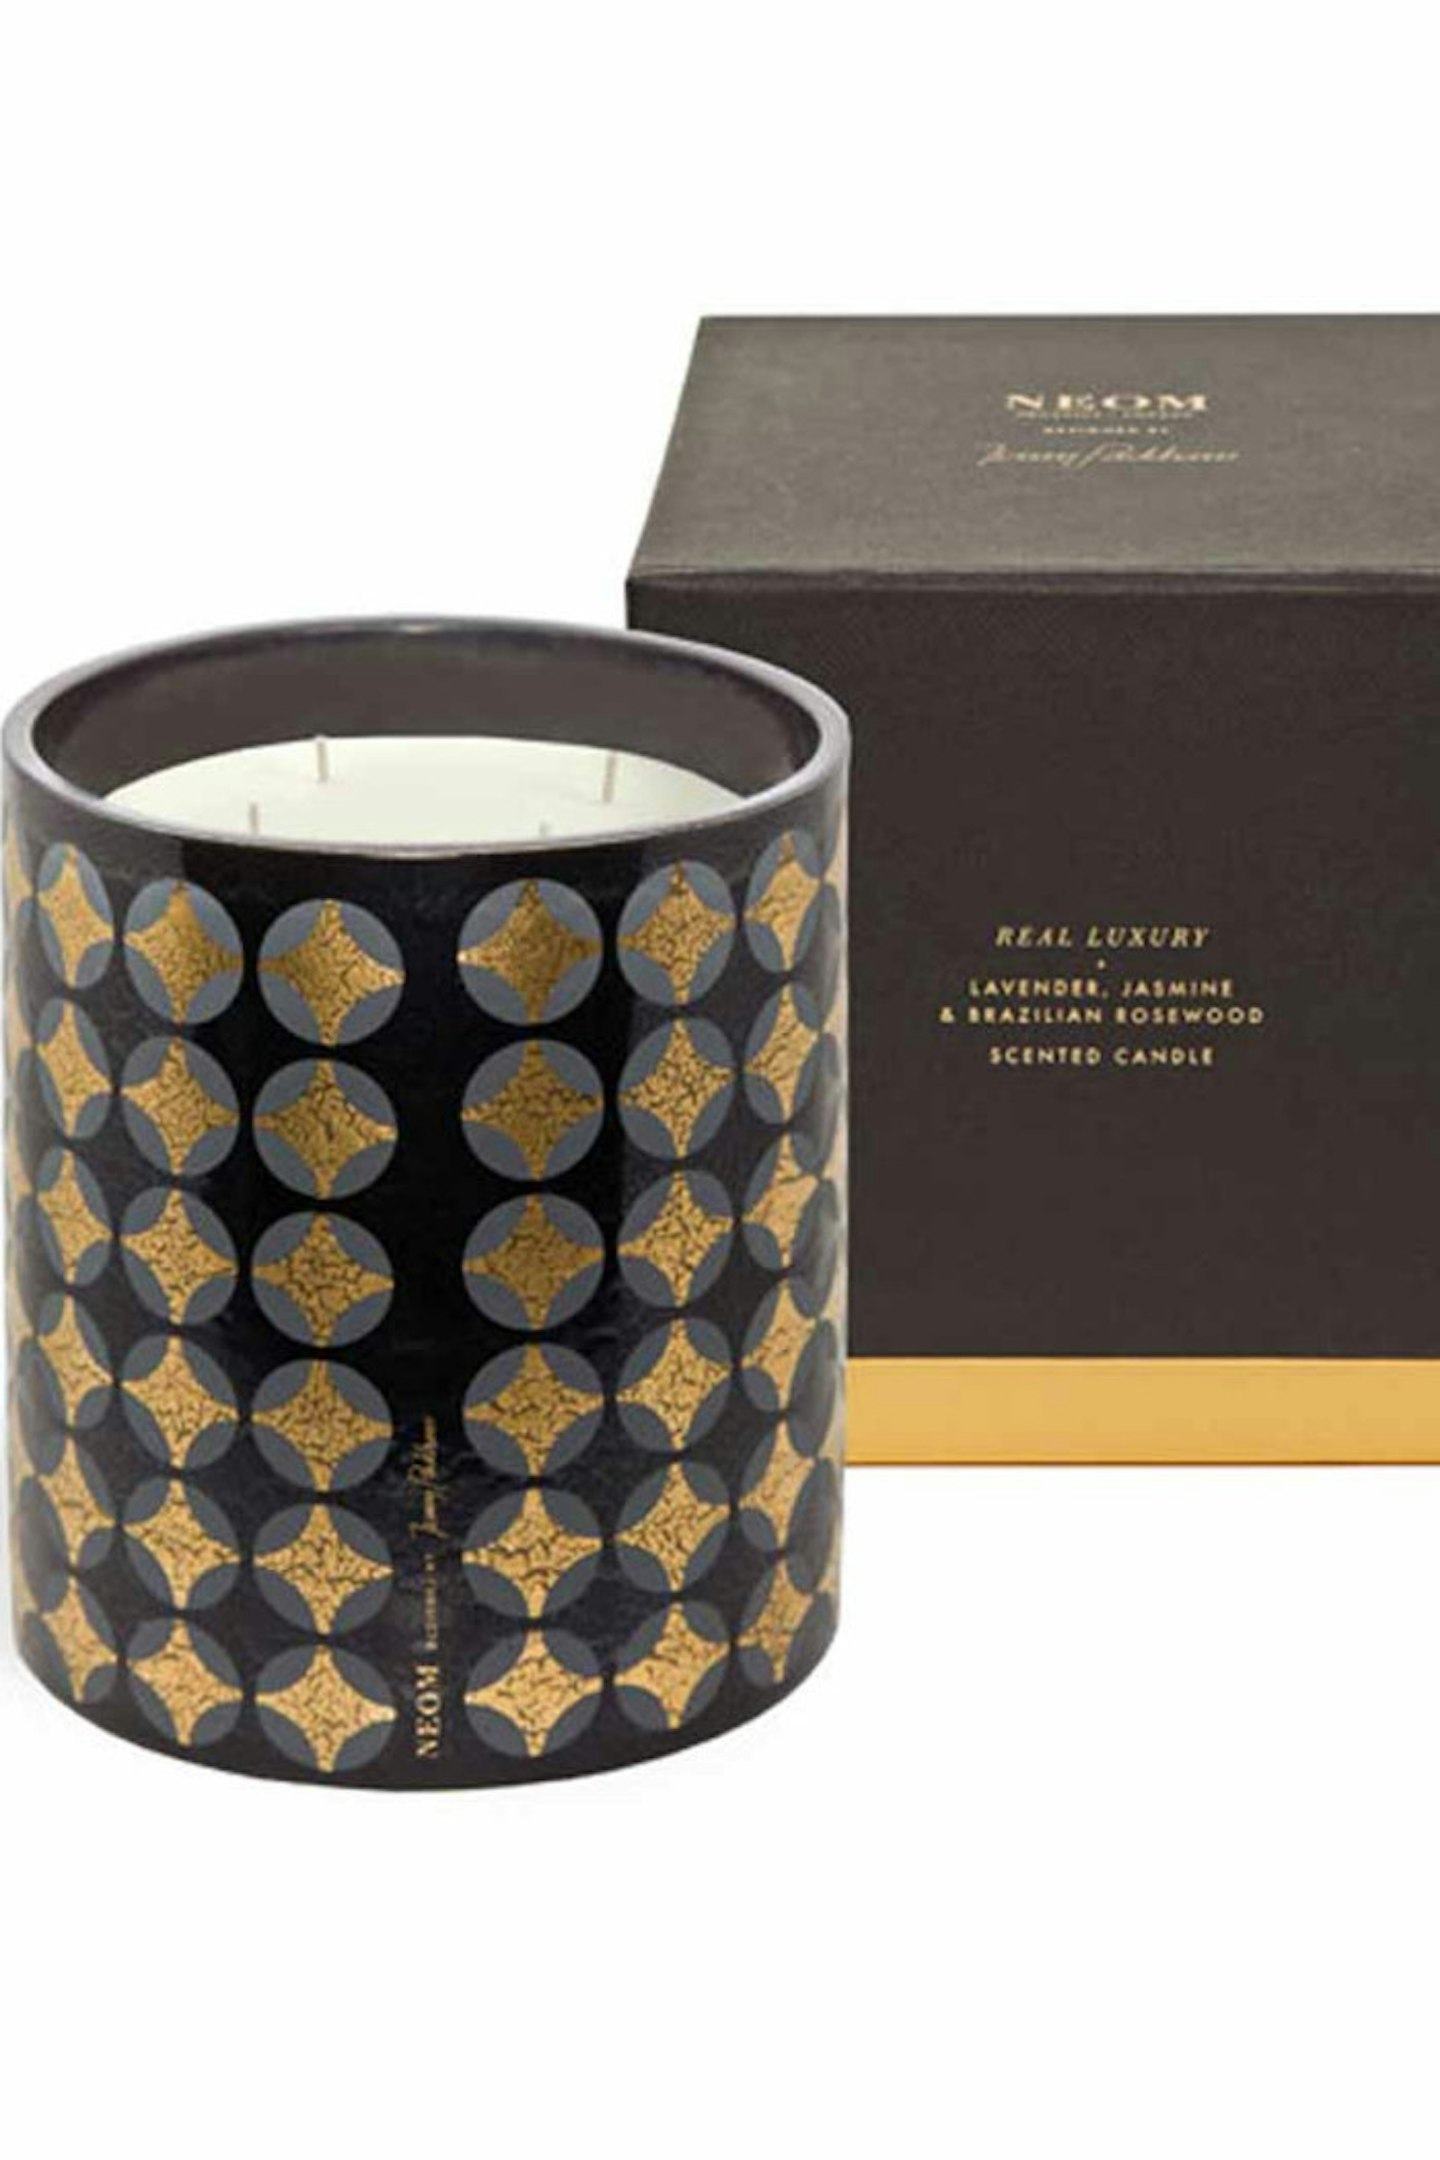 9. Jenny Packham for Neom Real Luxury Candle, £295